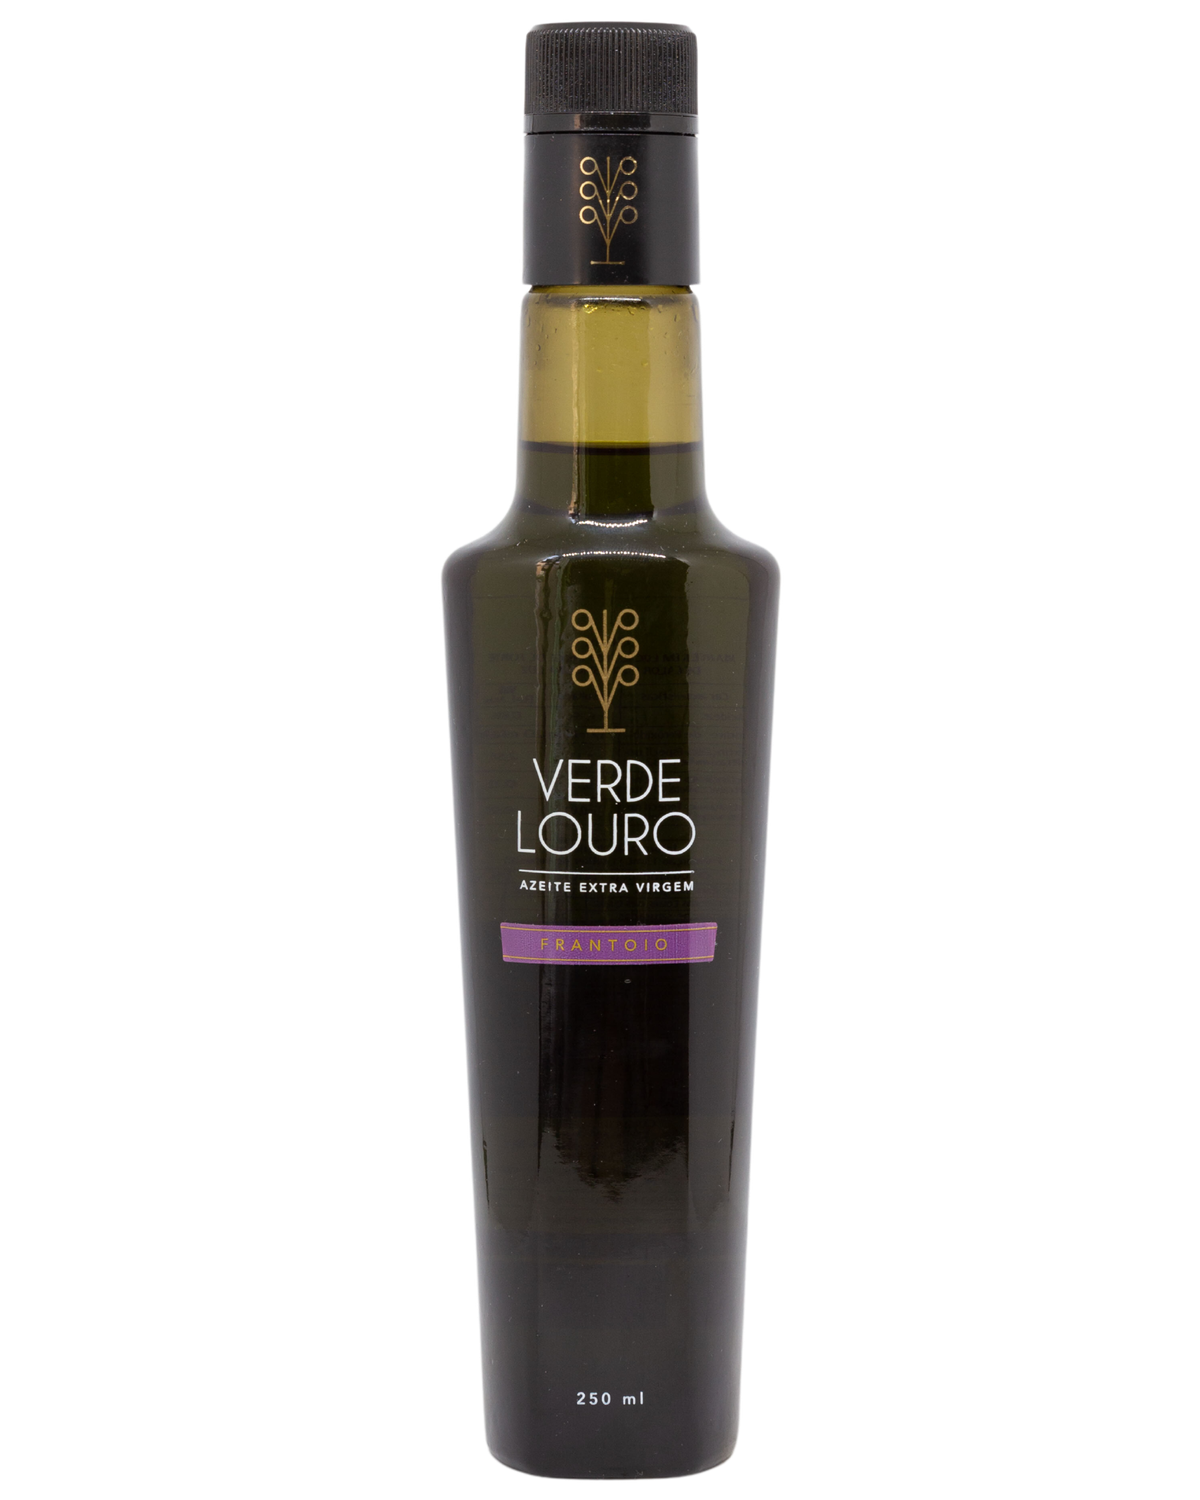 Extra Virgin Pills. The EVOO and its producer: Verde Louro Azeites Ltda